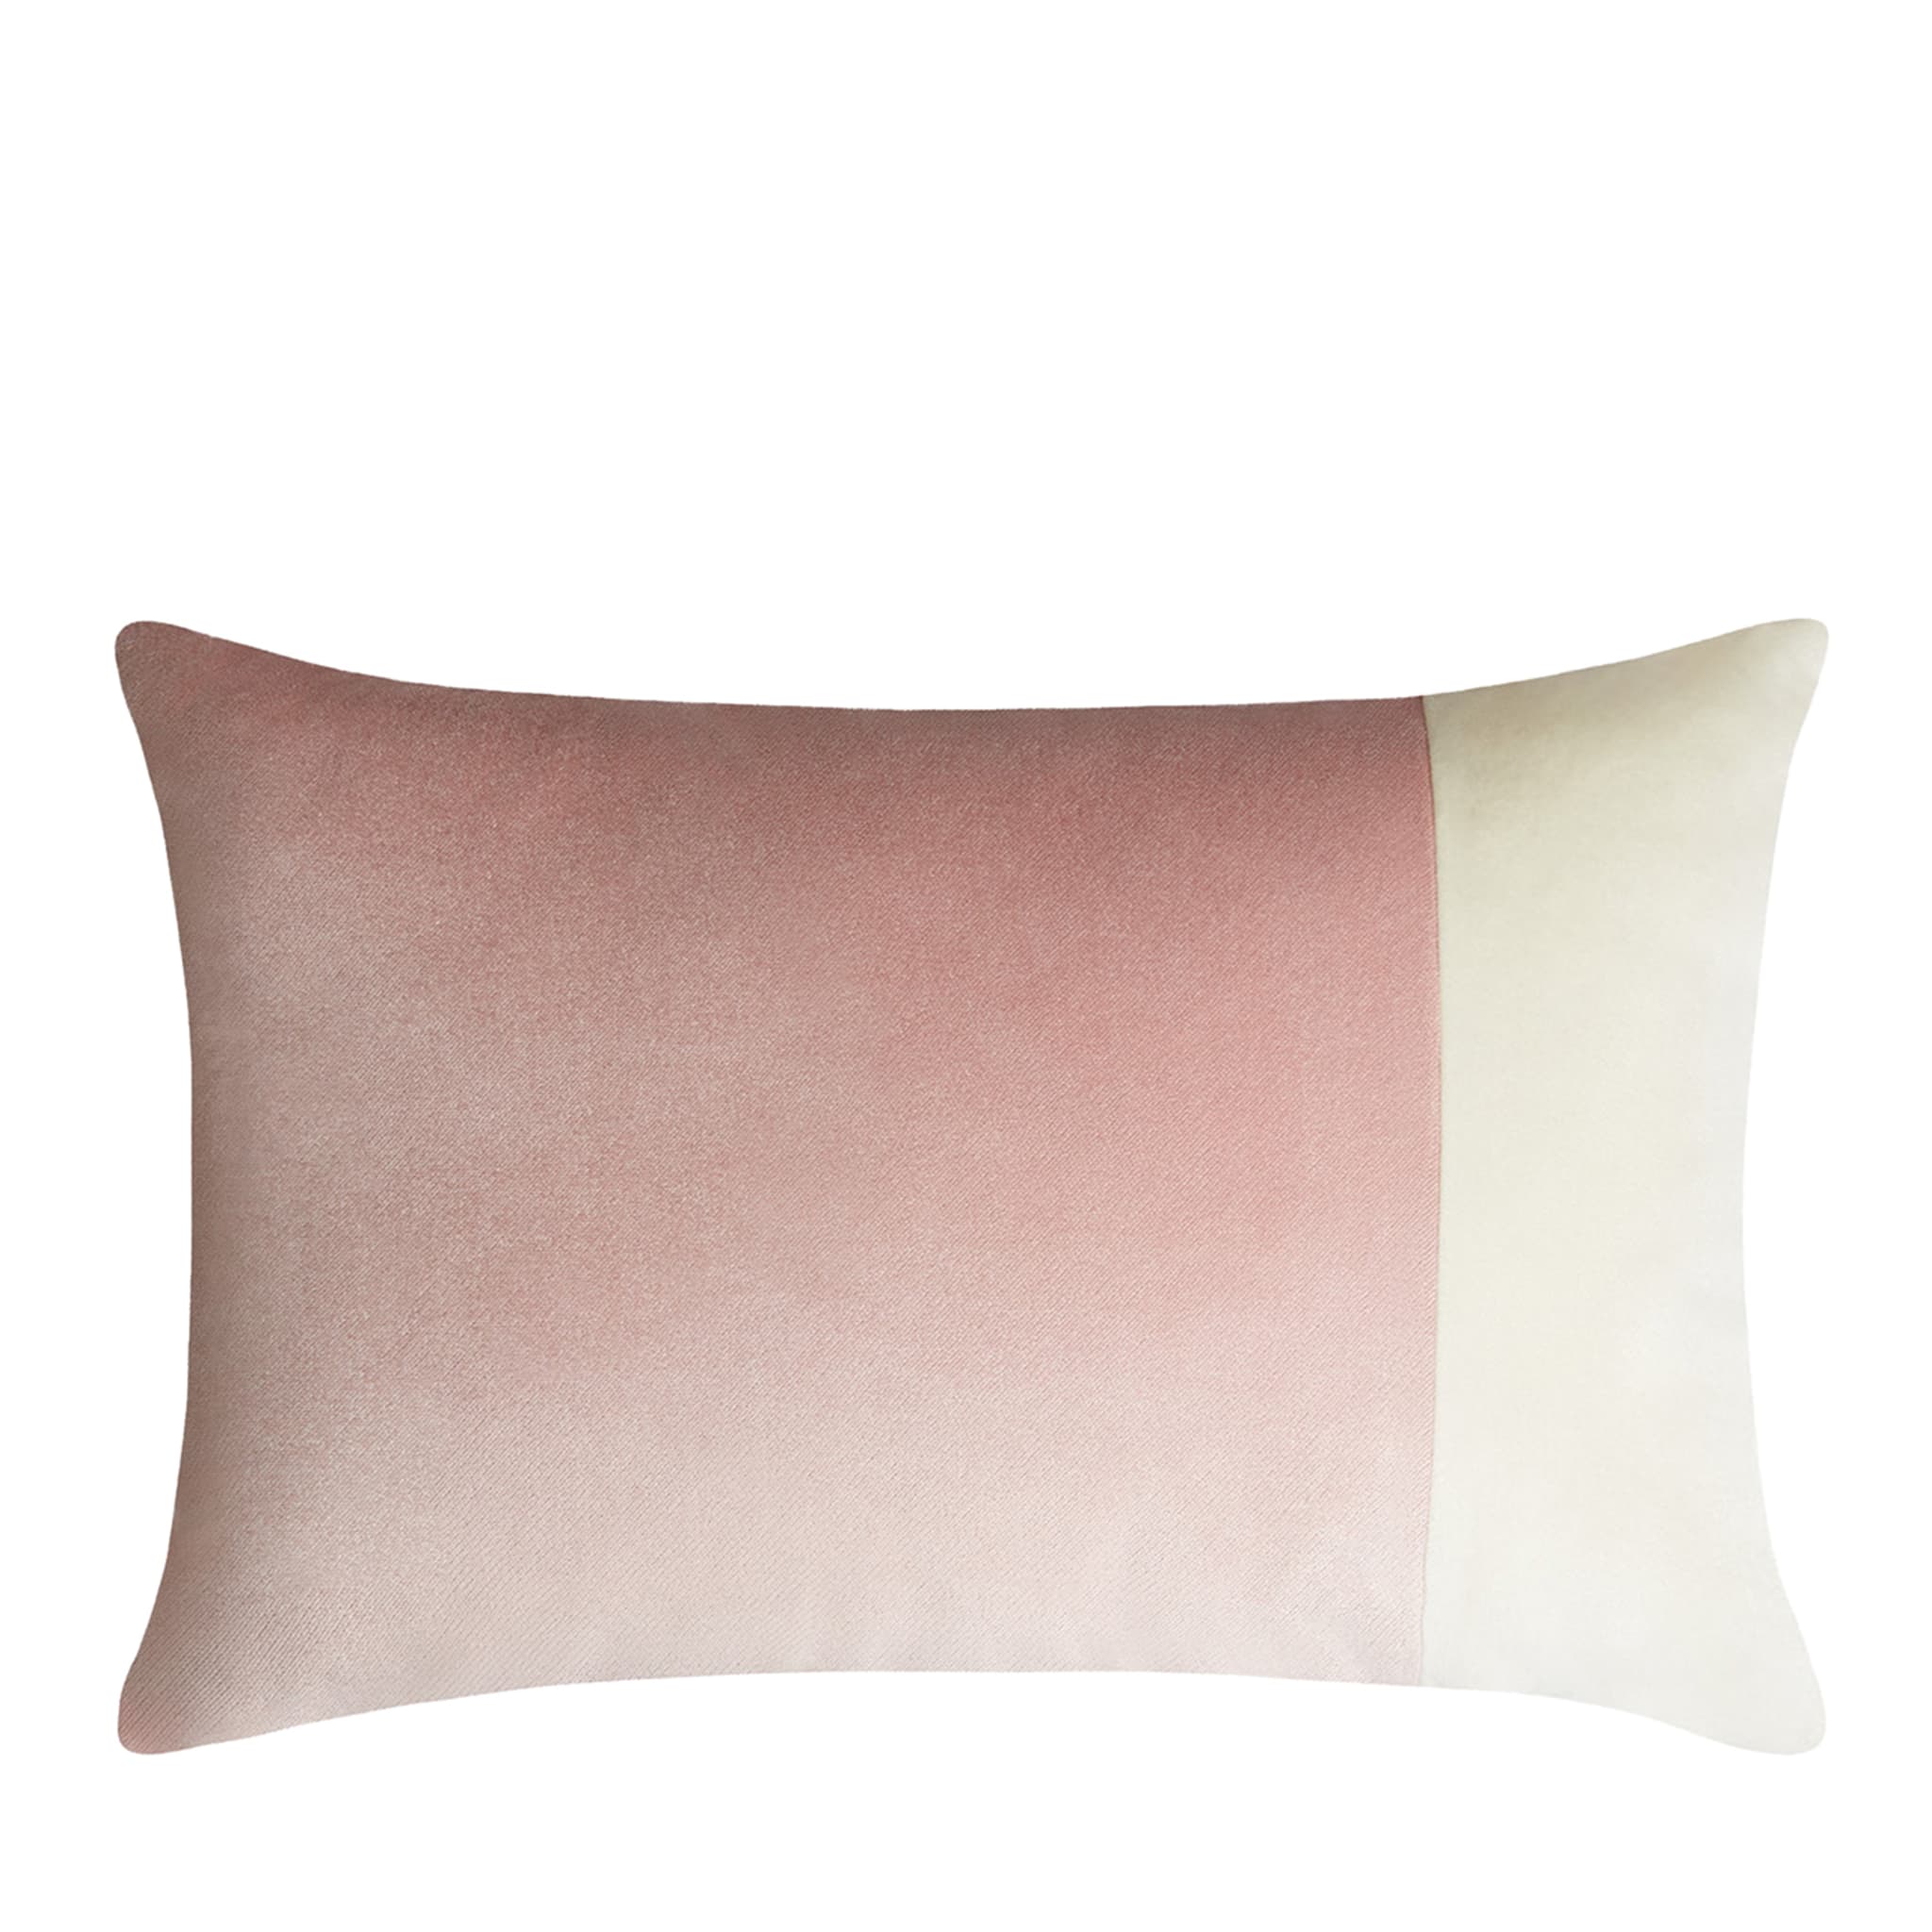 Double Pink and White Rectangular Cushion - Main view